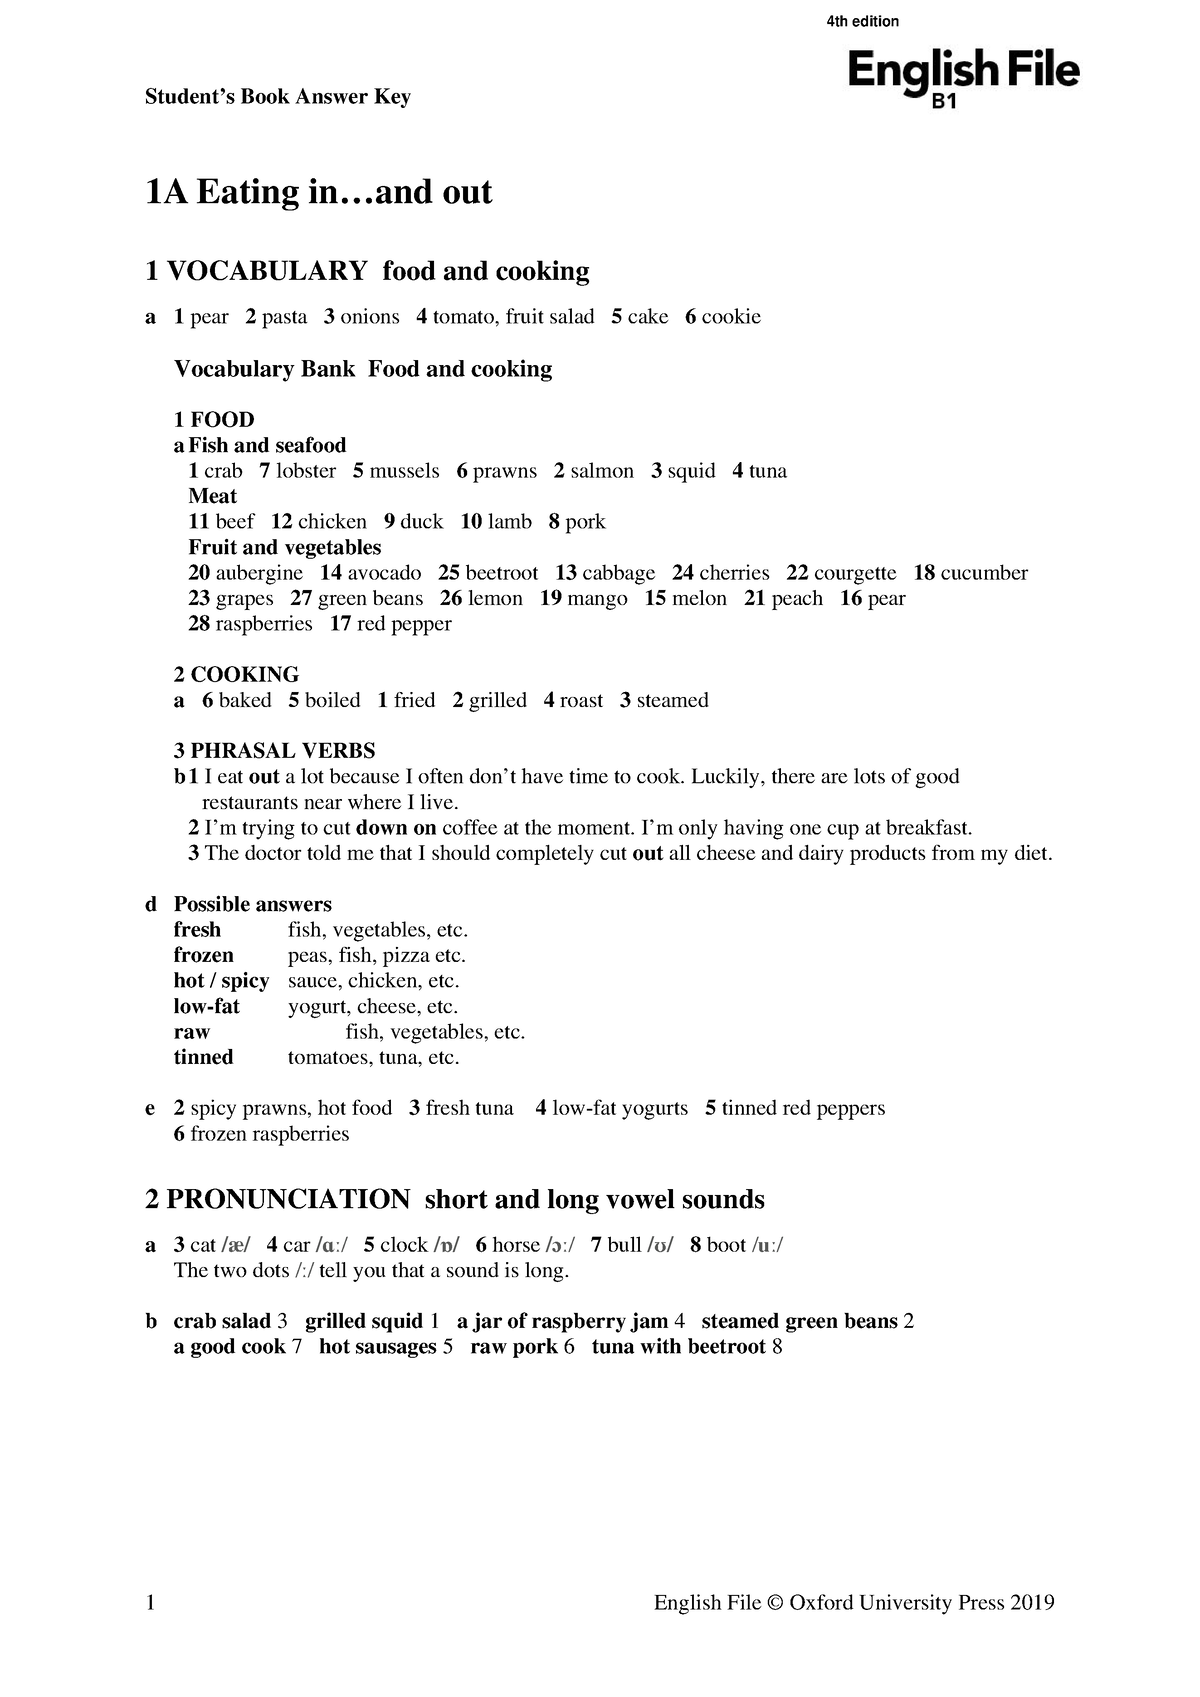 432699459-english-file-answer-key-student-s-book-answer-key-1a-eating